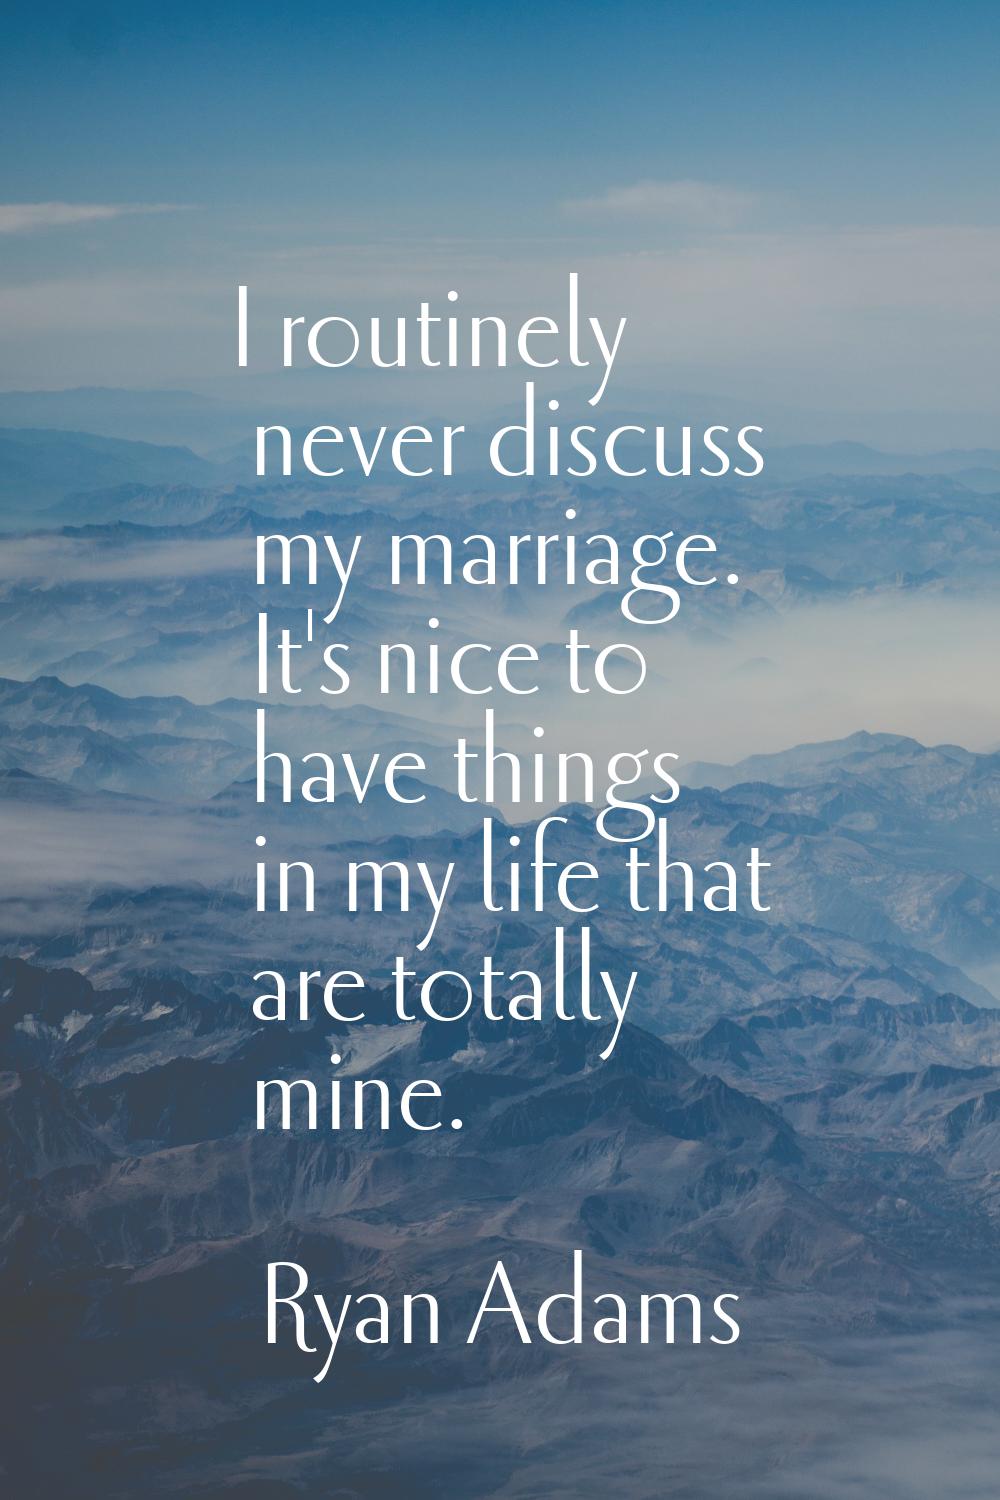 I routinely never discuss my marriage. It's nice to have things in my life that are totally mine.